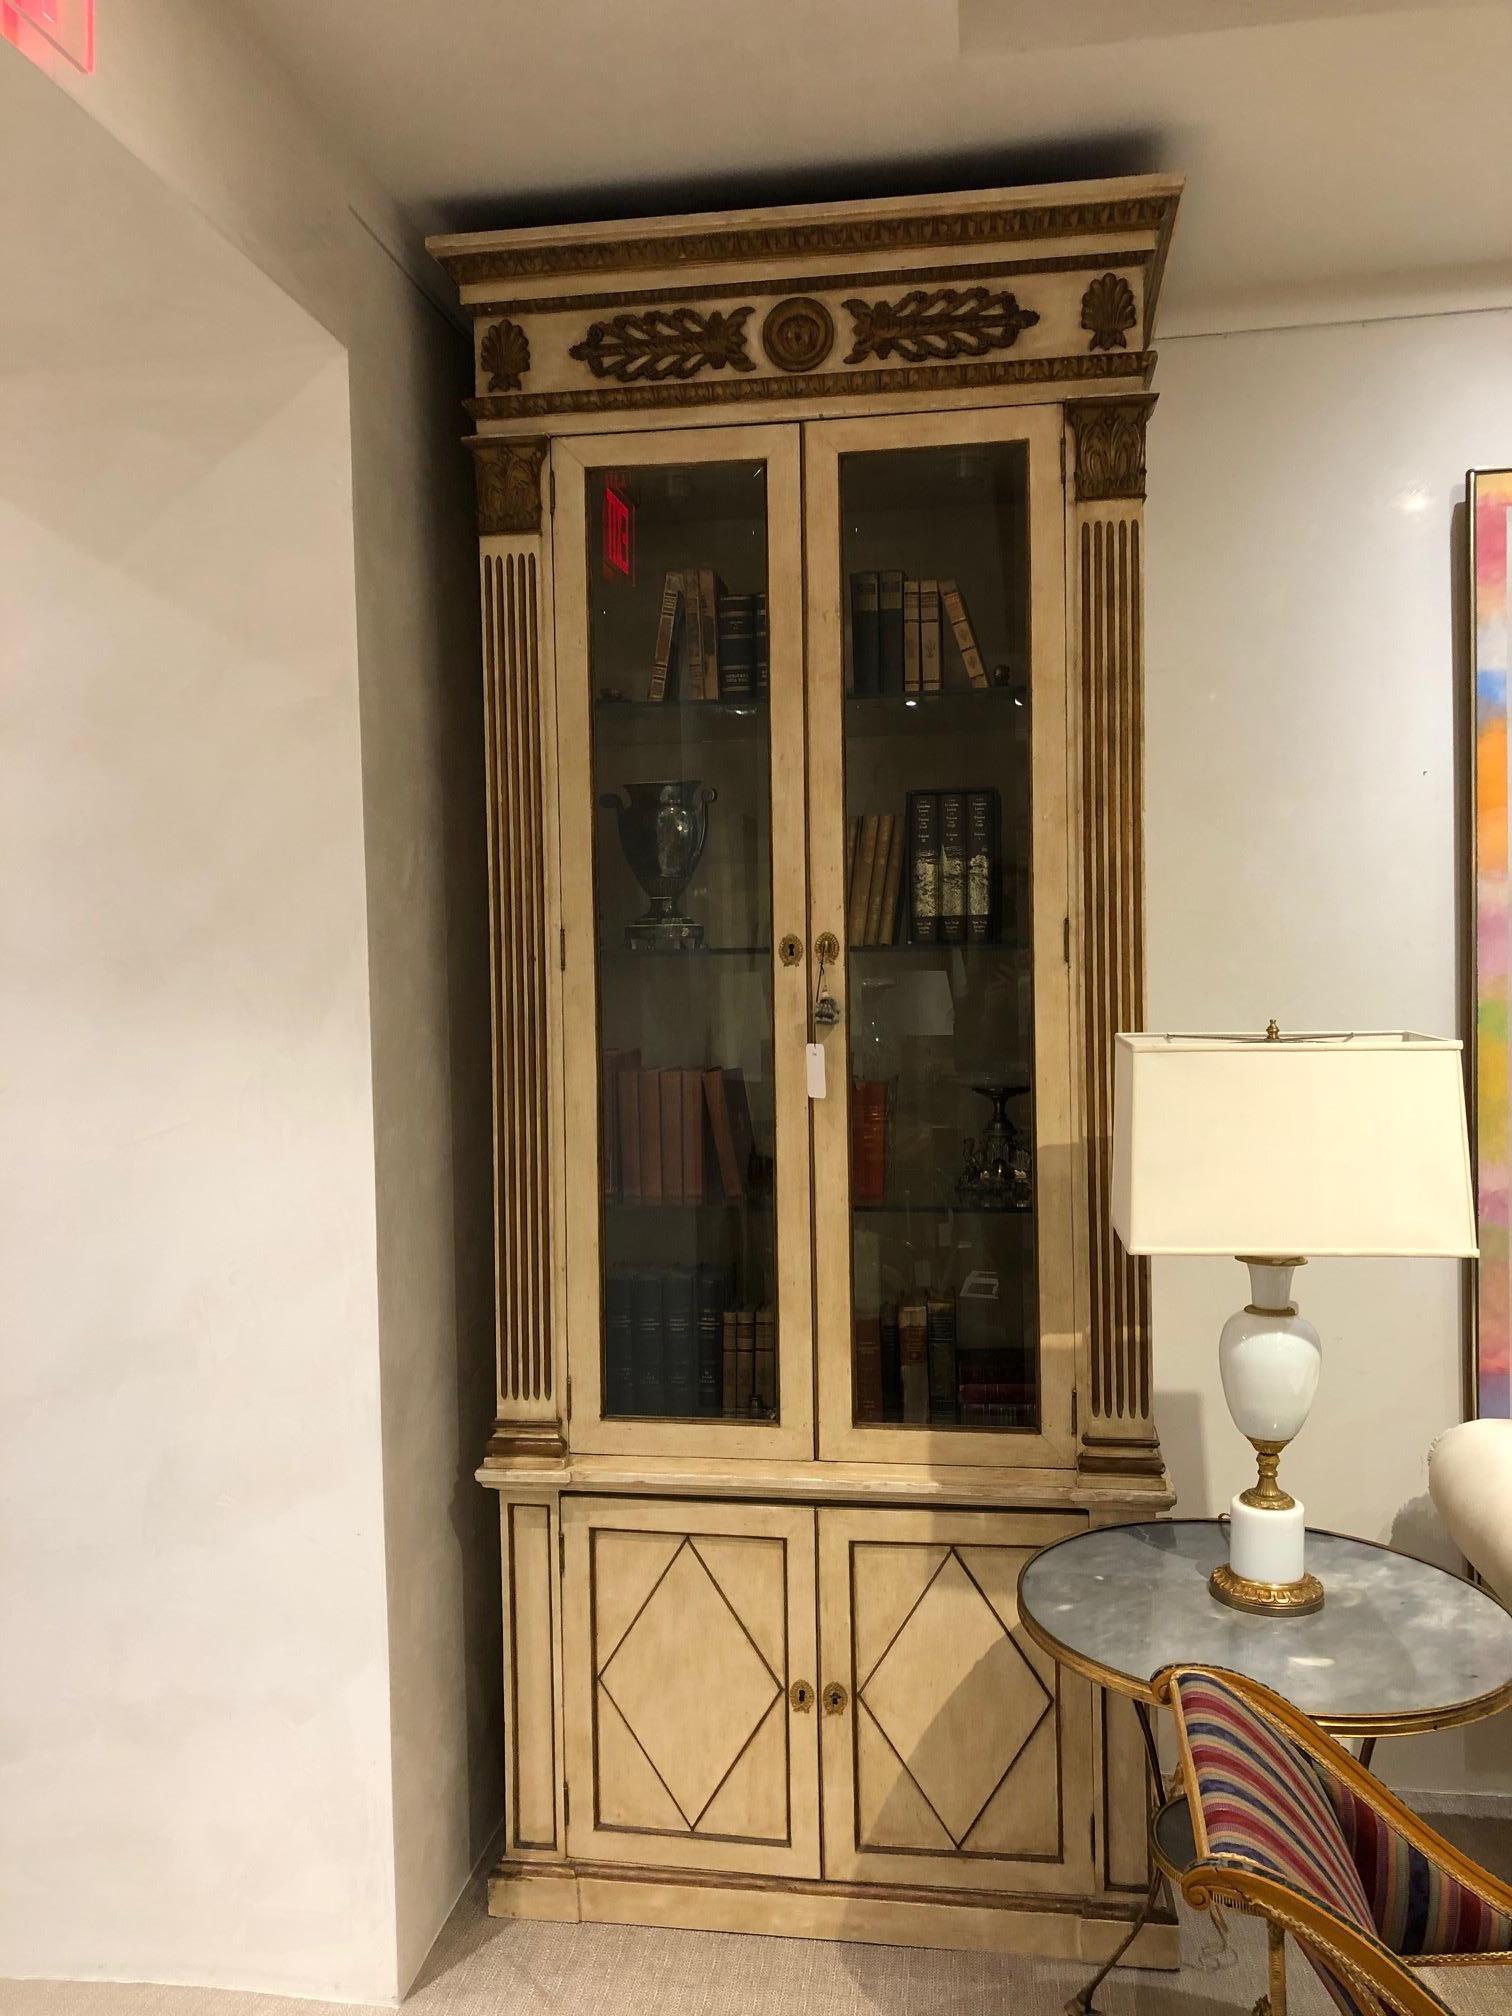 Pair of French Regence-style cream painted and gilt trimmed bookcase cabinets with 2 glass front doors with gilt pilaster column sides above 2 lower doors with a diamond design. (PRICED AS Pair).
 